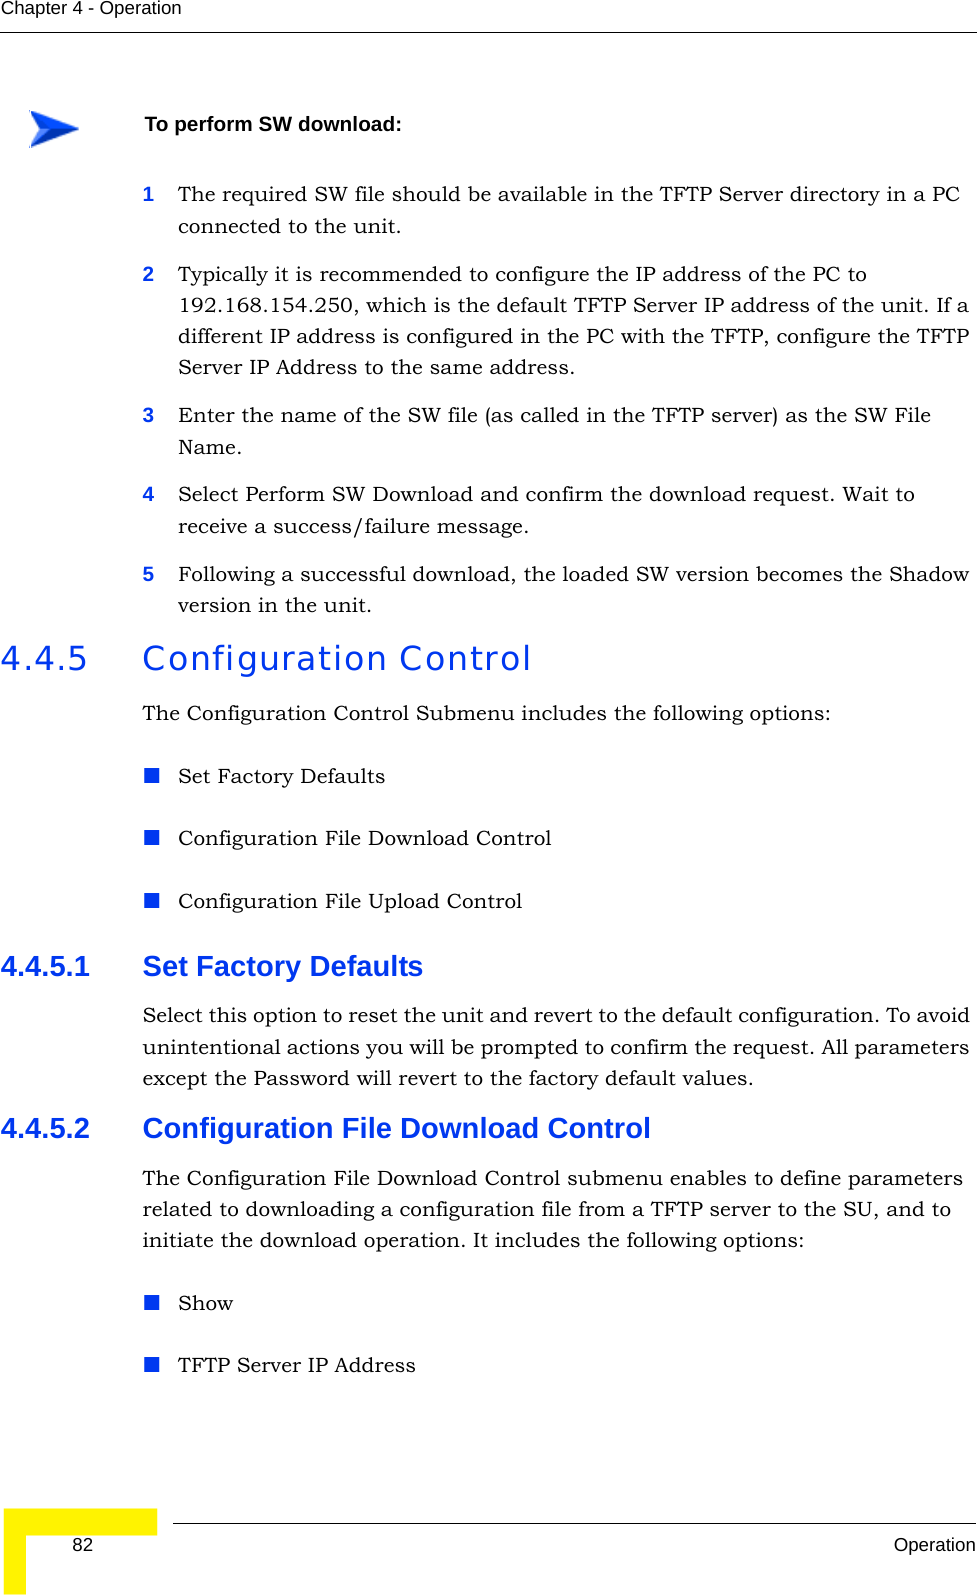  82 OperationChapter 4 - Operation1The required SW file should be available in the TFTP Server directory in a PC connected to the unit. 2Typically it is recommended to configure the IP address of the PC to 192.168.154.250, which is the default TFTP Server IP address of the unit. If a different IP address is configured in the PC with the TFTP, configure the TFTP Server IP Address to the same address.3Enter the name of the SW file (as called in the TFTP server) as the SW File Name.4Select Perform SW Download and confirm the download request. Wait to receive a success/failure message.5Following a successful download, the loaded SW version becomes the Shadow version in the unit.4.4.5 Configuration ControlThe Configuration Control Submenu includes the following options:Set Factory DefaultsConfiguration File Download ControlConfiguration File Upload Control4.4.5.1 Set Factory DefaultsSelect this option to reset the unit and revert to the default configuration. To avoid unintentional actions you will be prompted to confirm the request. All parameters except the Password will revert to the factory default values.4.4.5.2 Configuration File Download ControlThe Configuration File Download Control submenu enables to define parameters related to downloading a configuration file from a TFTP server to the SU, and to initiate the download operation. It includes the following options:ShowTFTP Server IP AddressTo perform SW download: